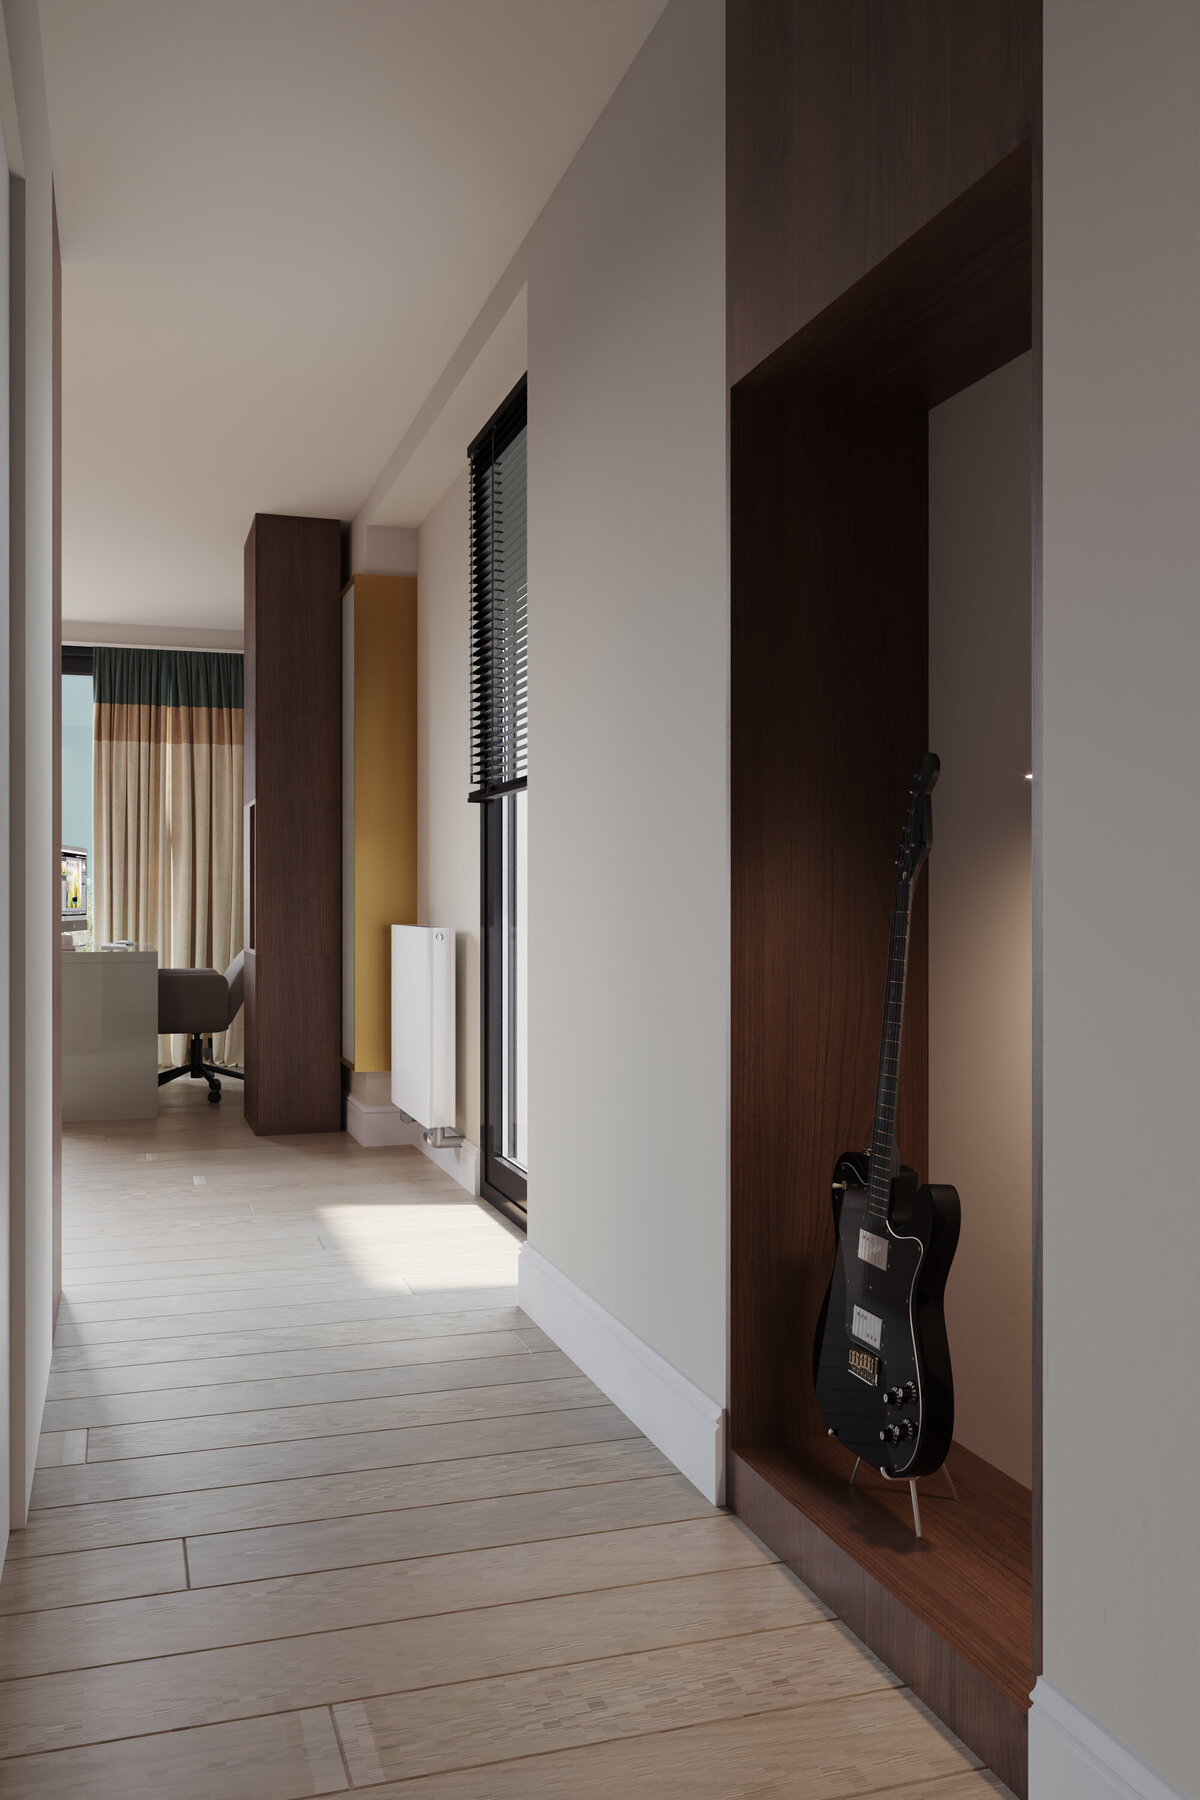 Corridor with an exposed guitar